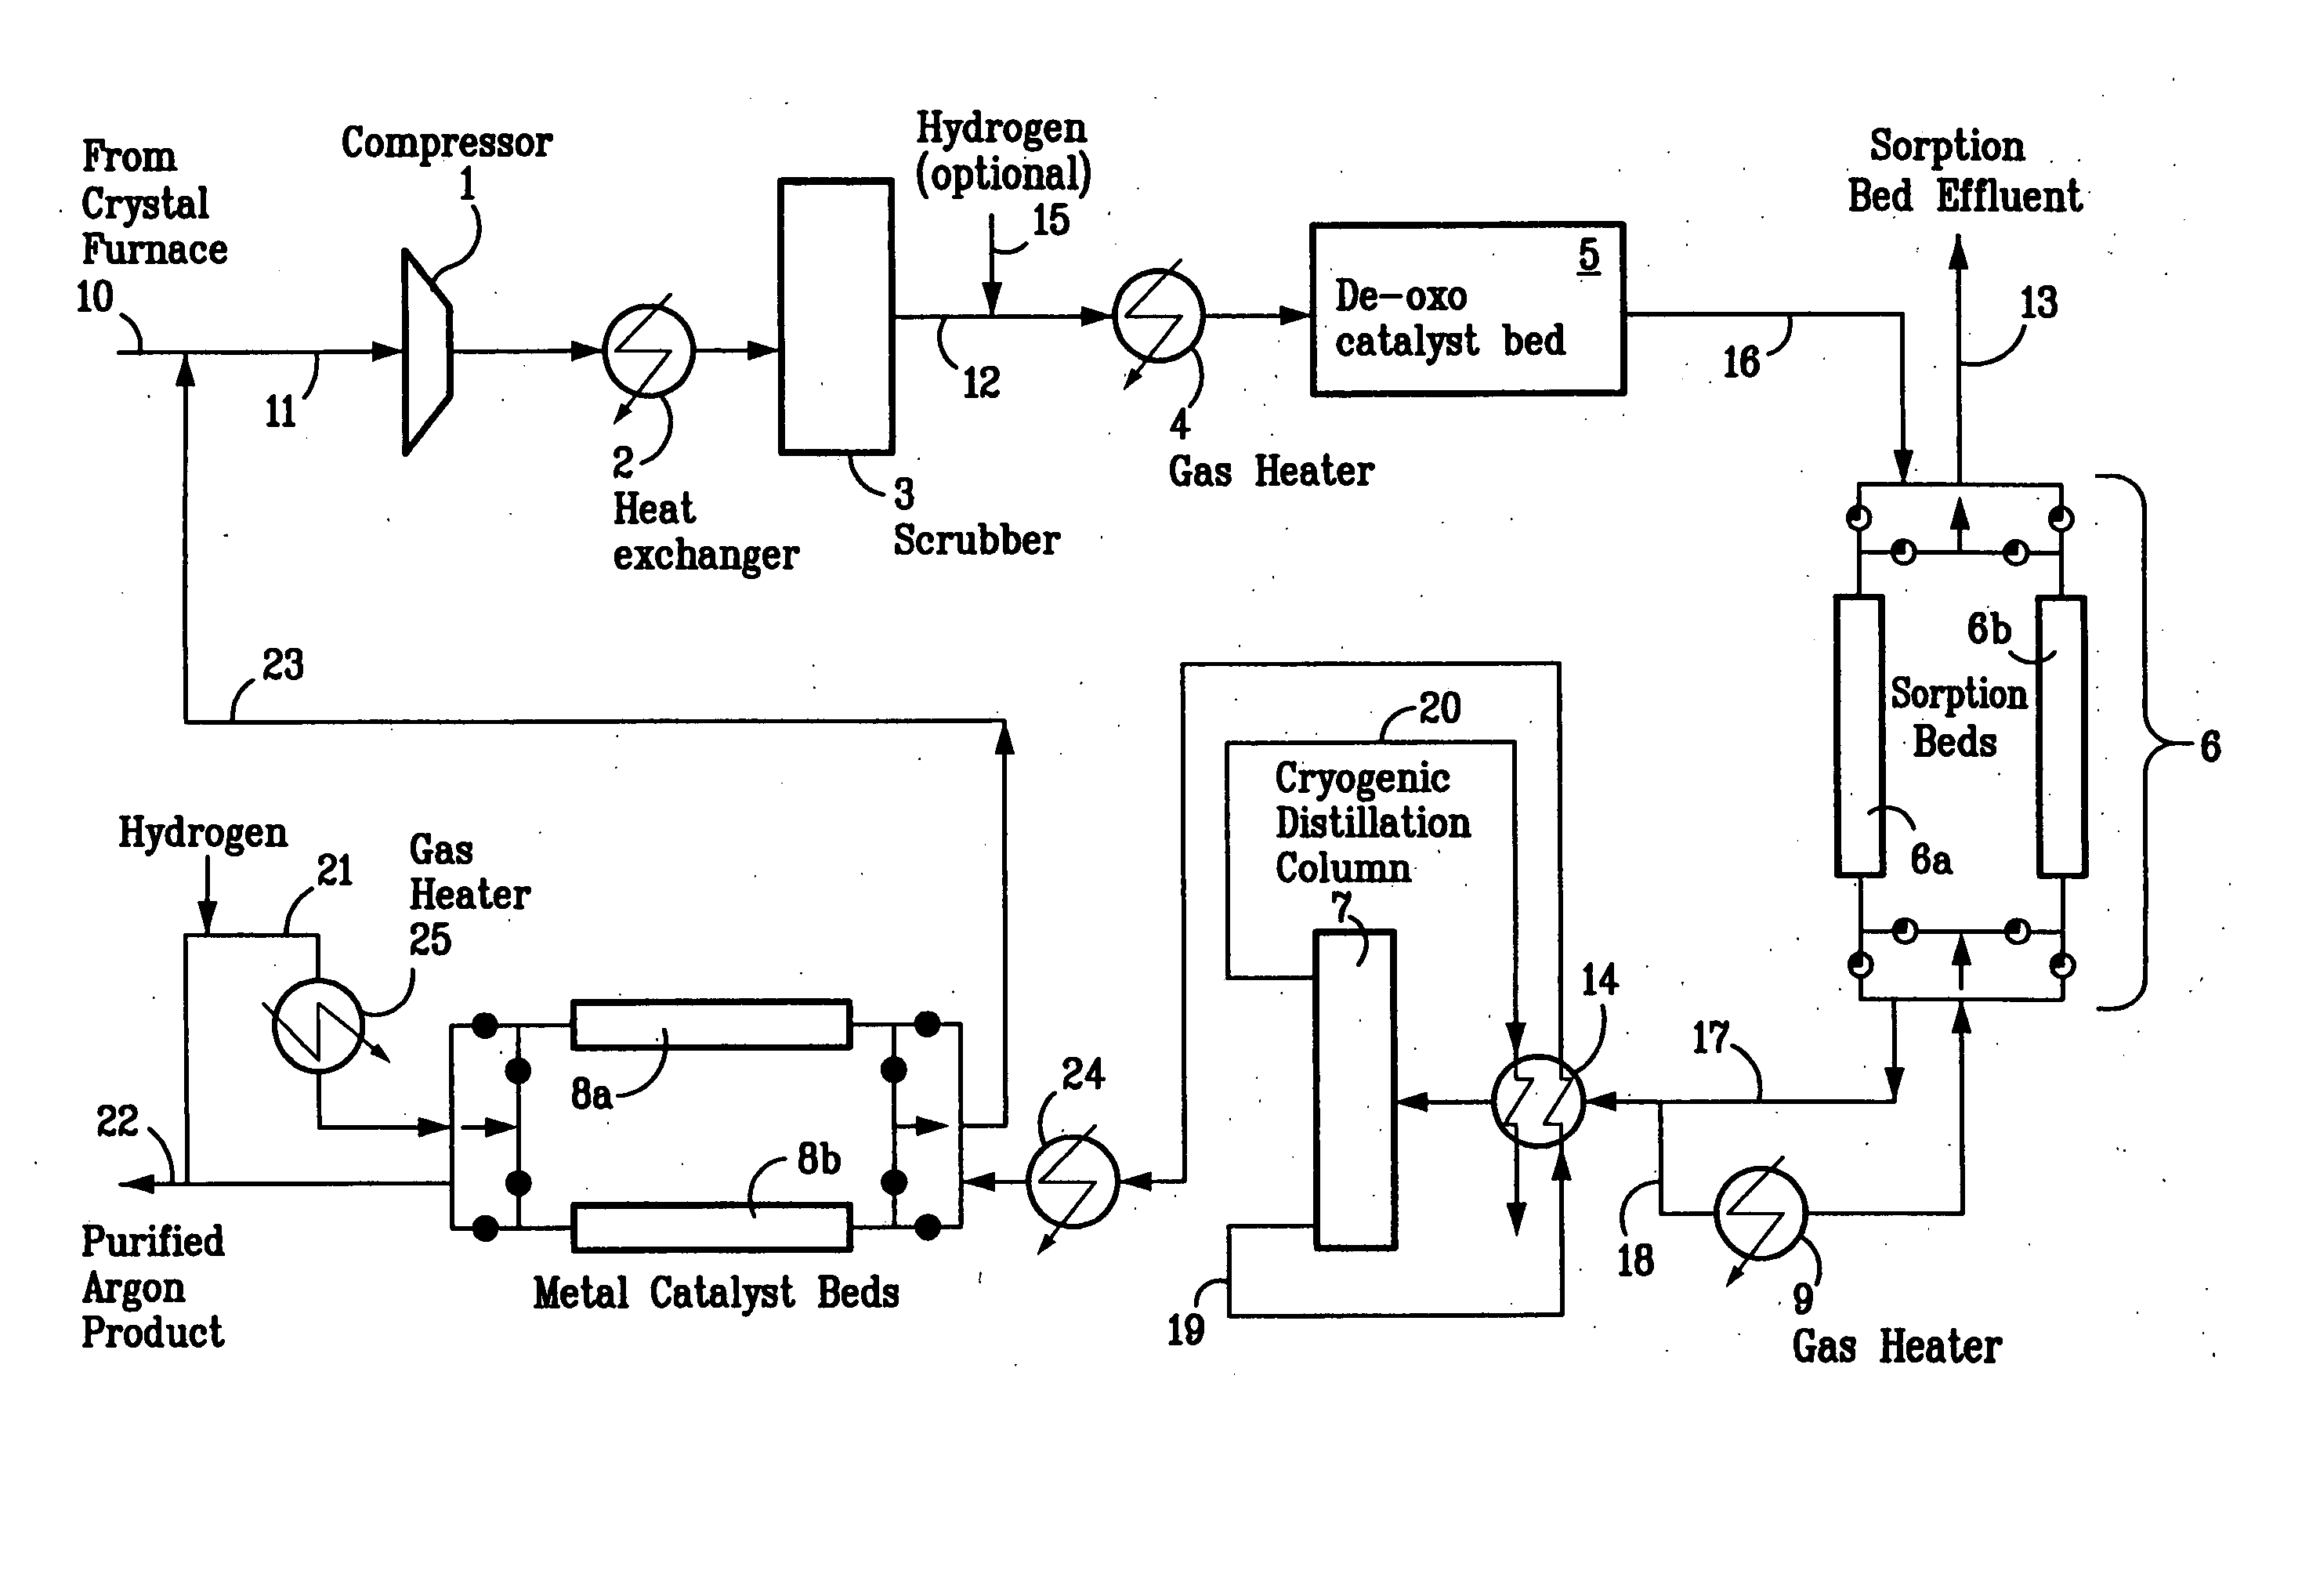 Process for recovery, purification, and recycle of argon